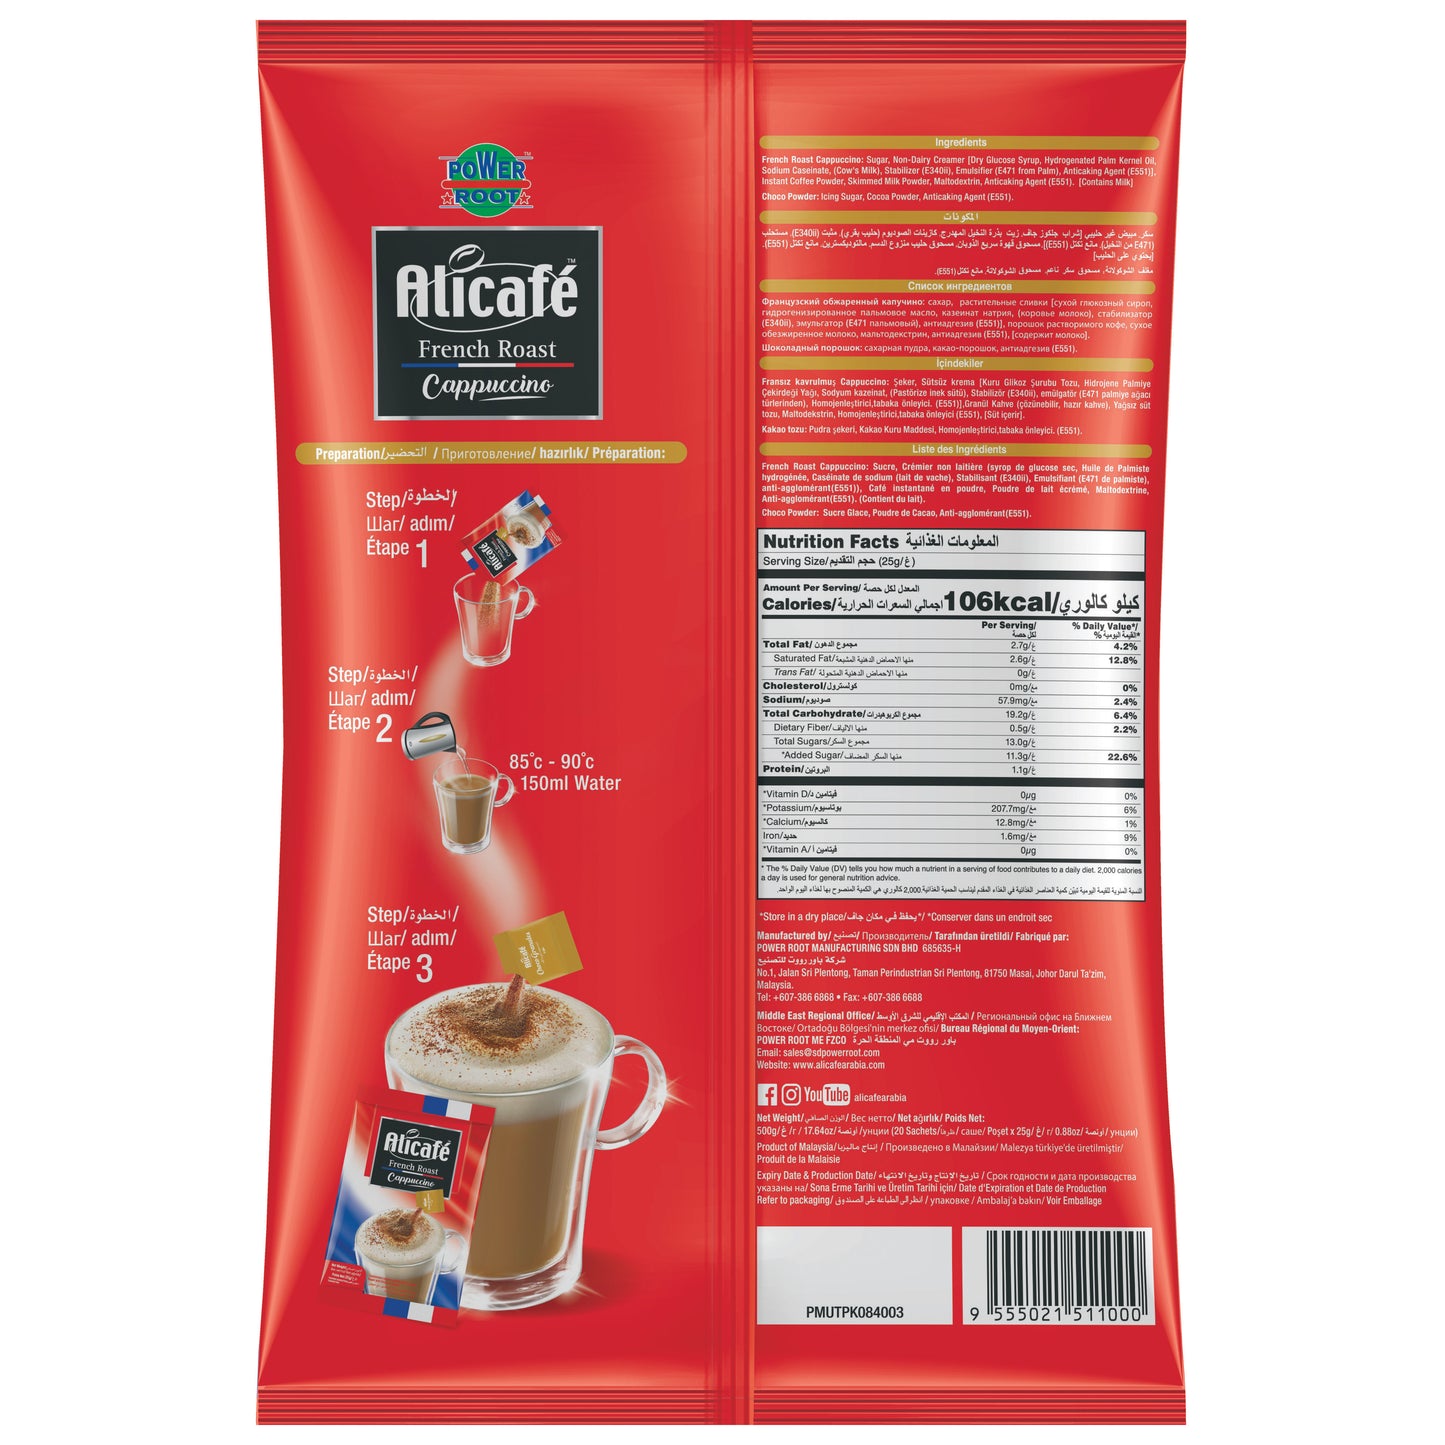 Alicafe French Roast Cappuccino with Choco Granules Sachets.